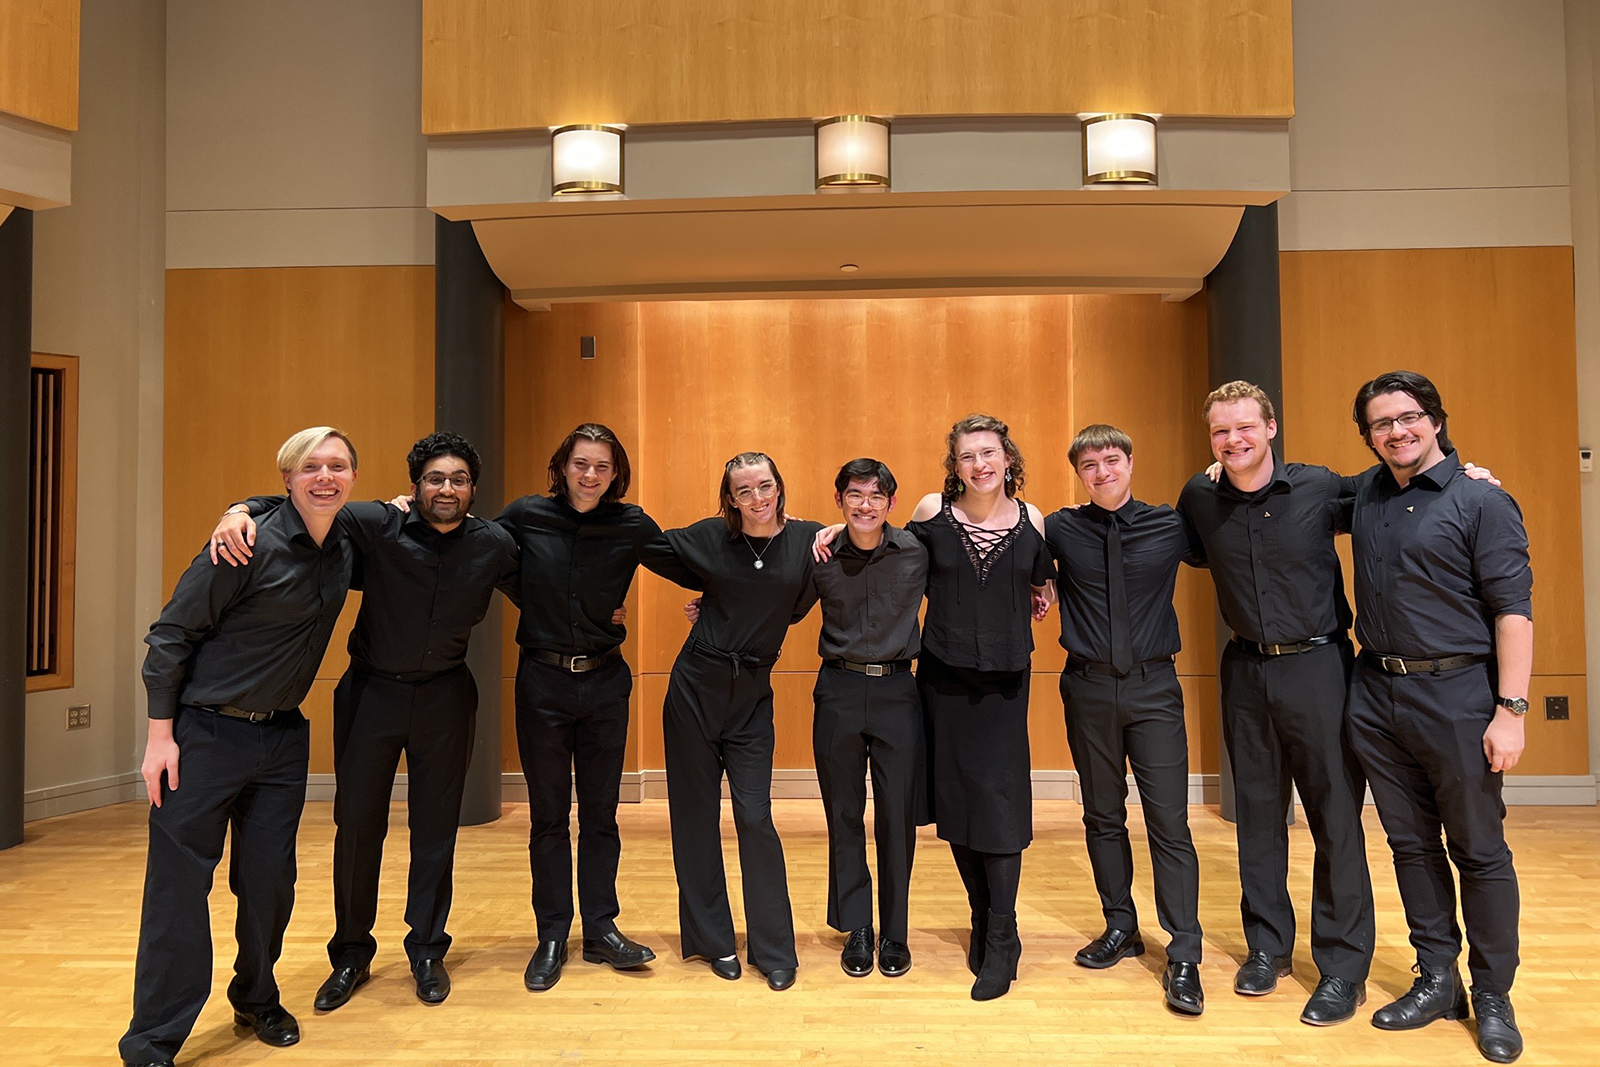 A capella members in all black concert attire pose for a photo in a concert hall.